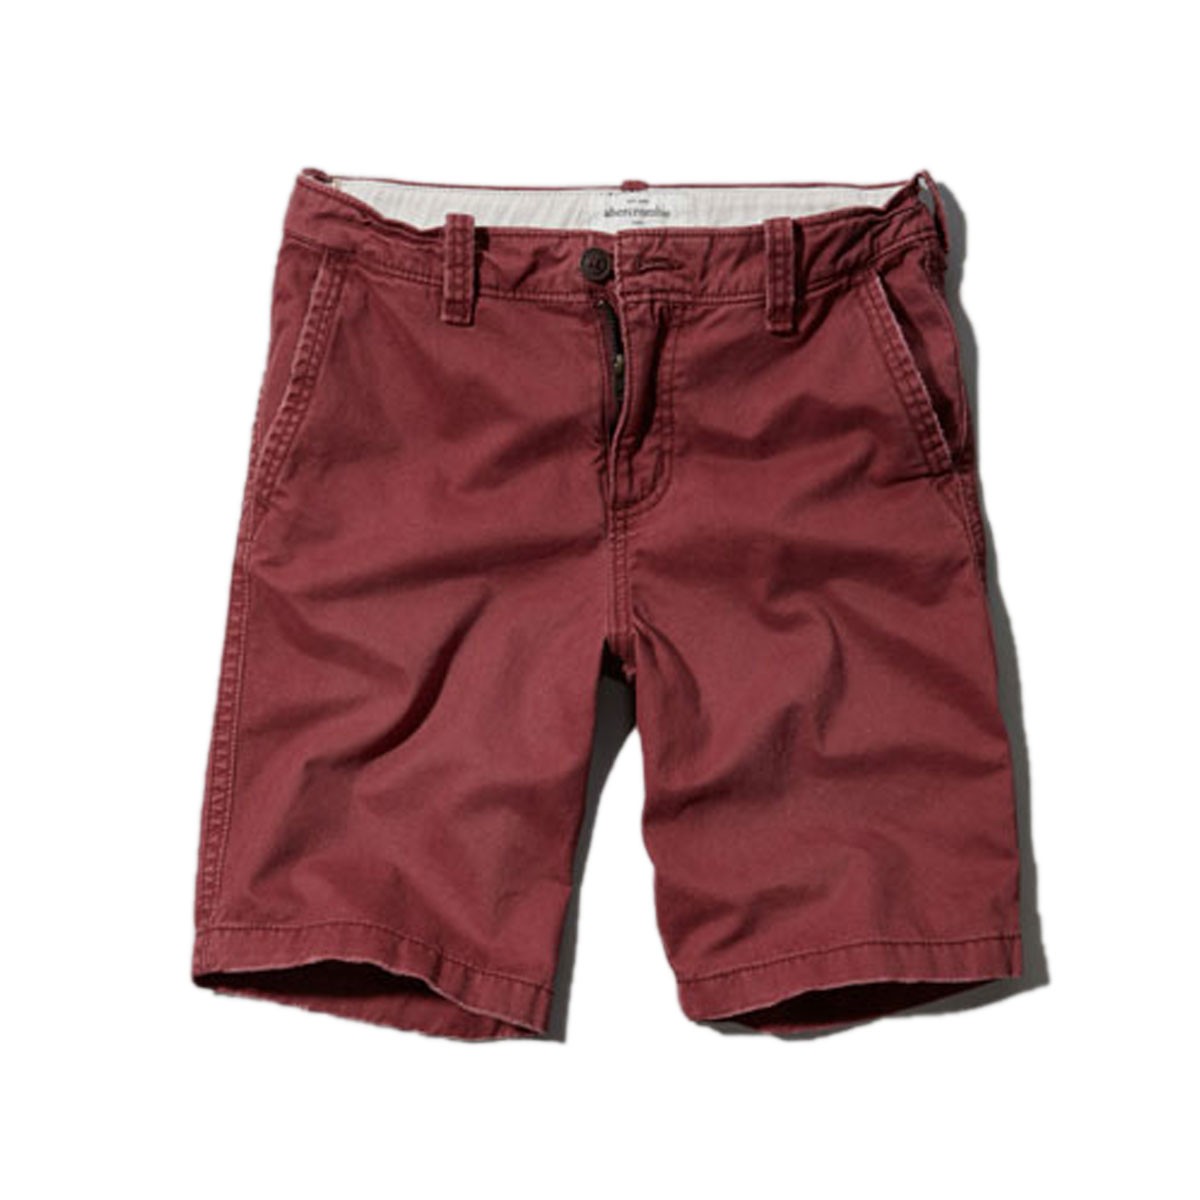 Хå AbercrombieKids  Ҷ ܡ 硼ȥѥ a&f classic fit shorts 228-688-0283-053